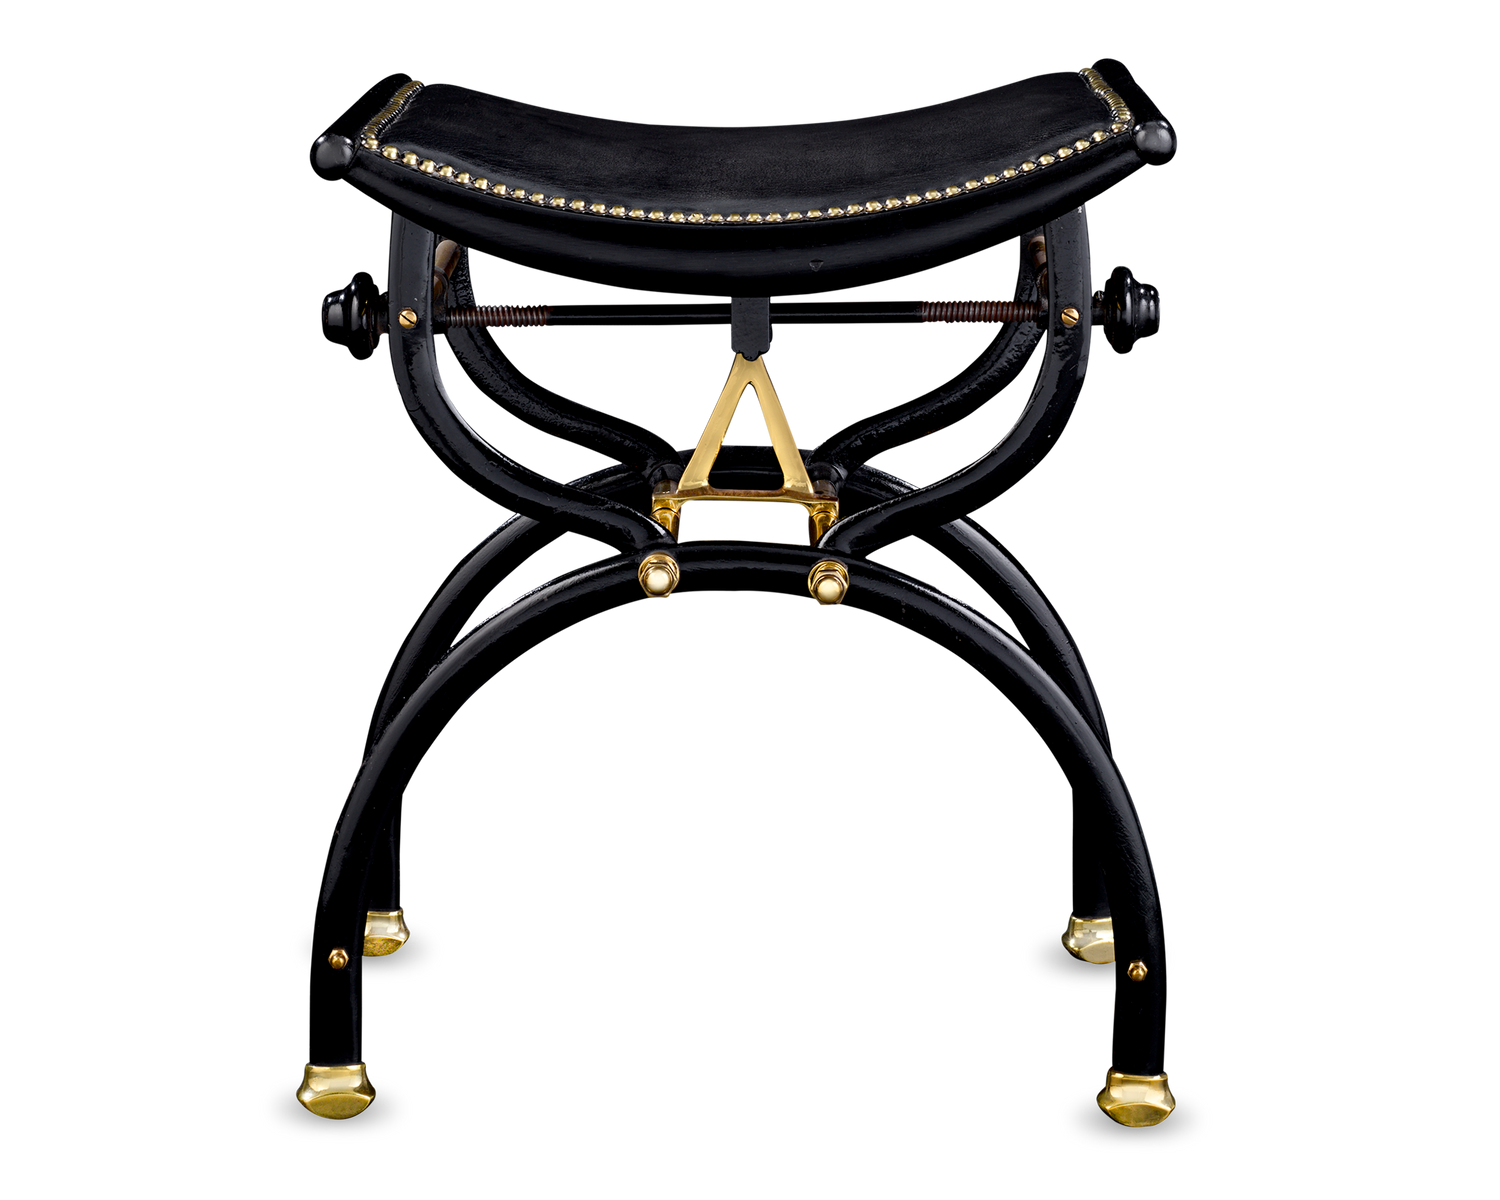 Piano Stool by C.H. Hare & Son